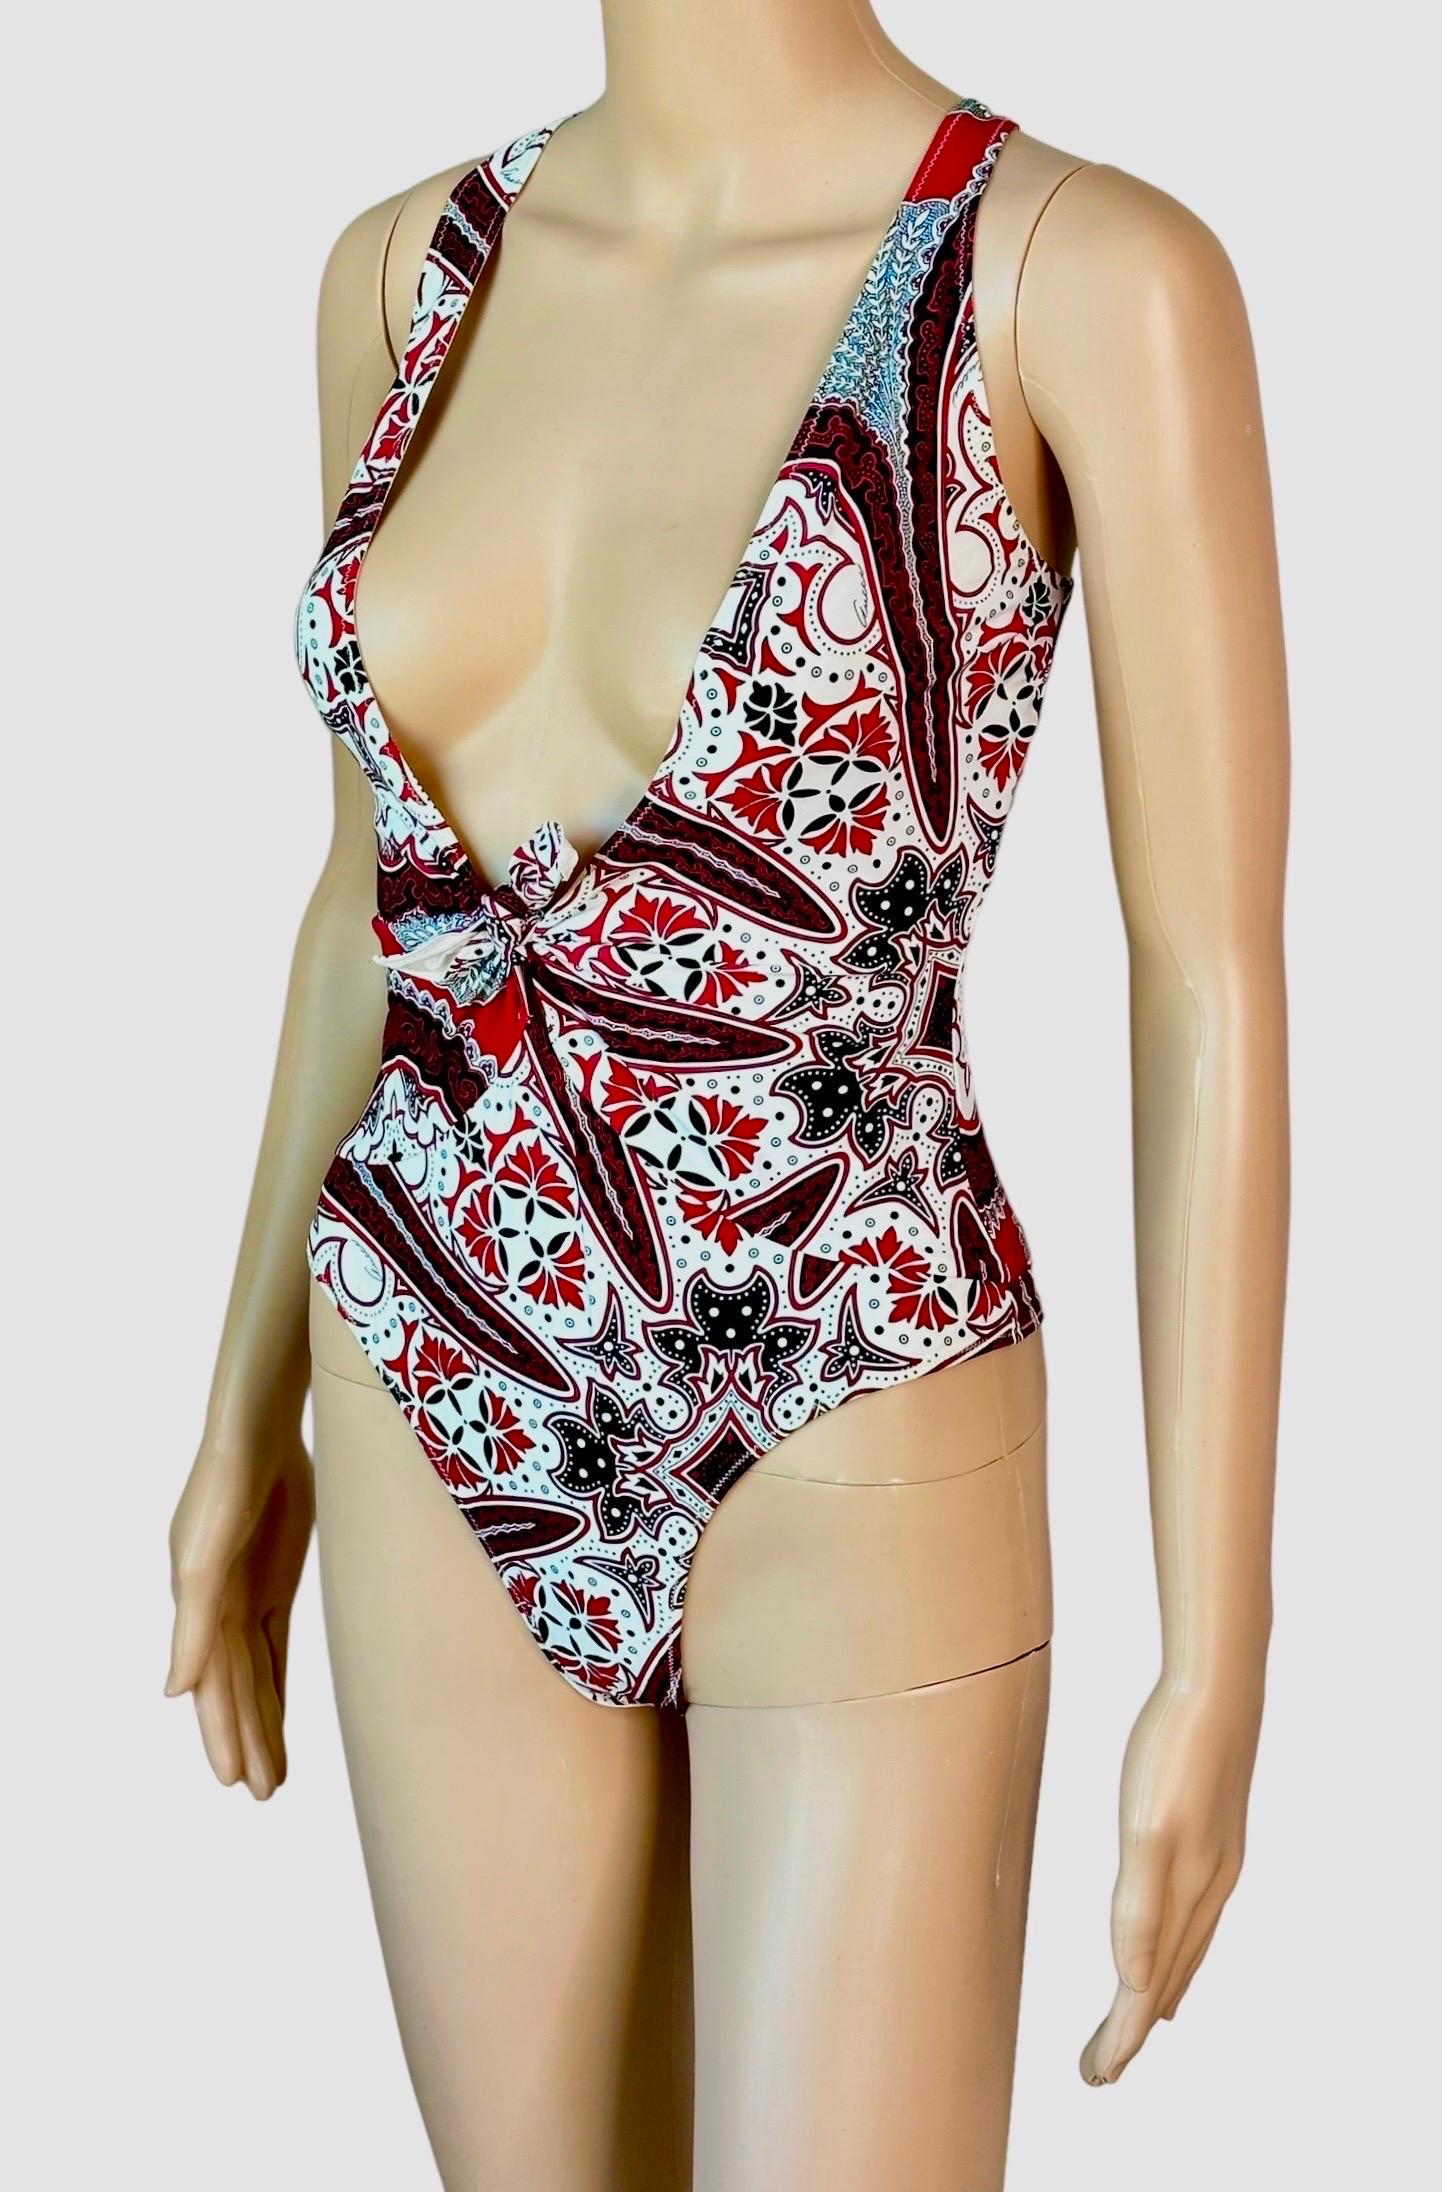 Tom Ford for Gucci Cruise 2004 Unworn One Piece Bodysuit Swimsuit Swimwear  For Sale 2